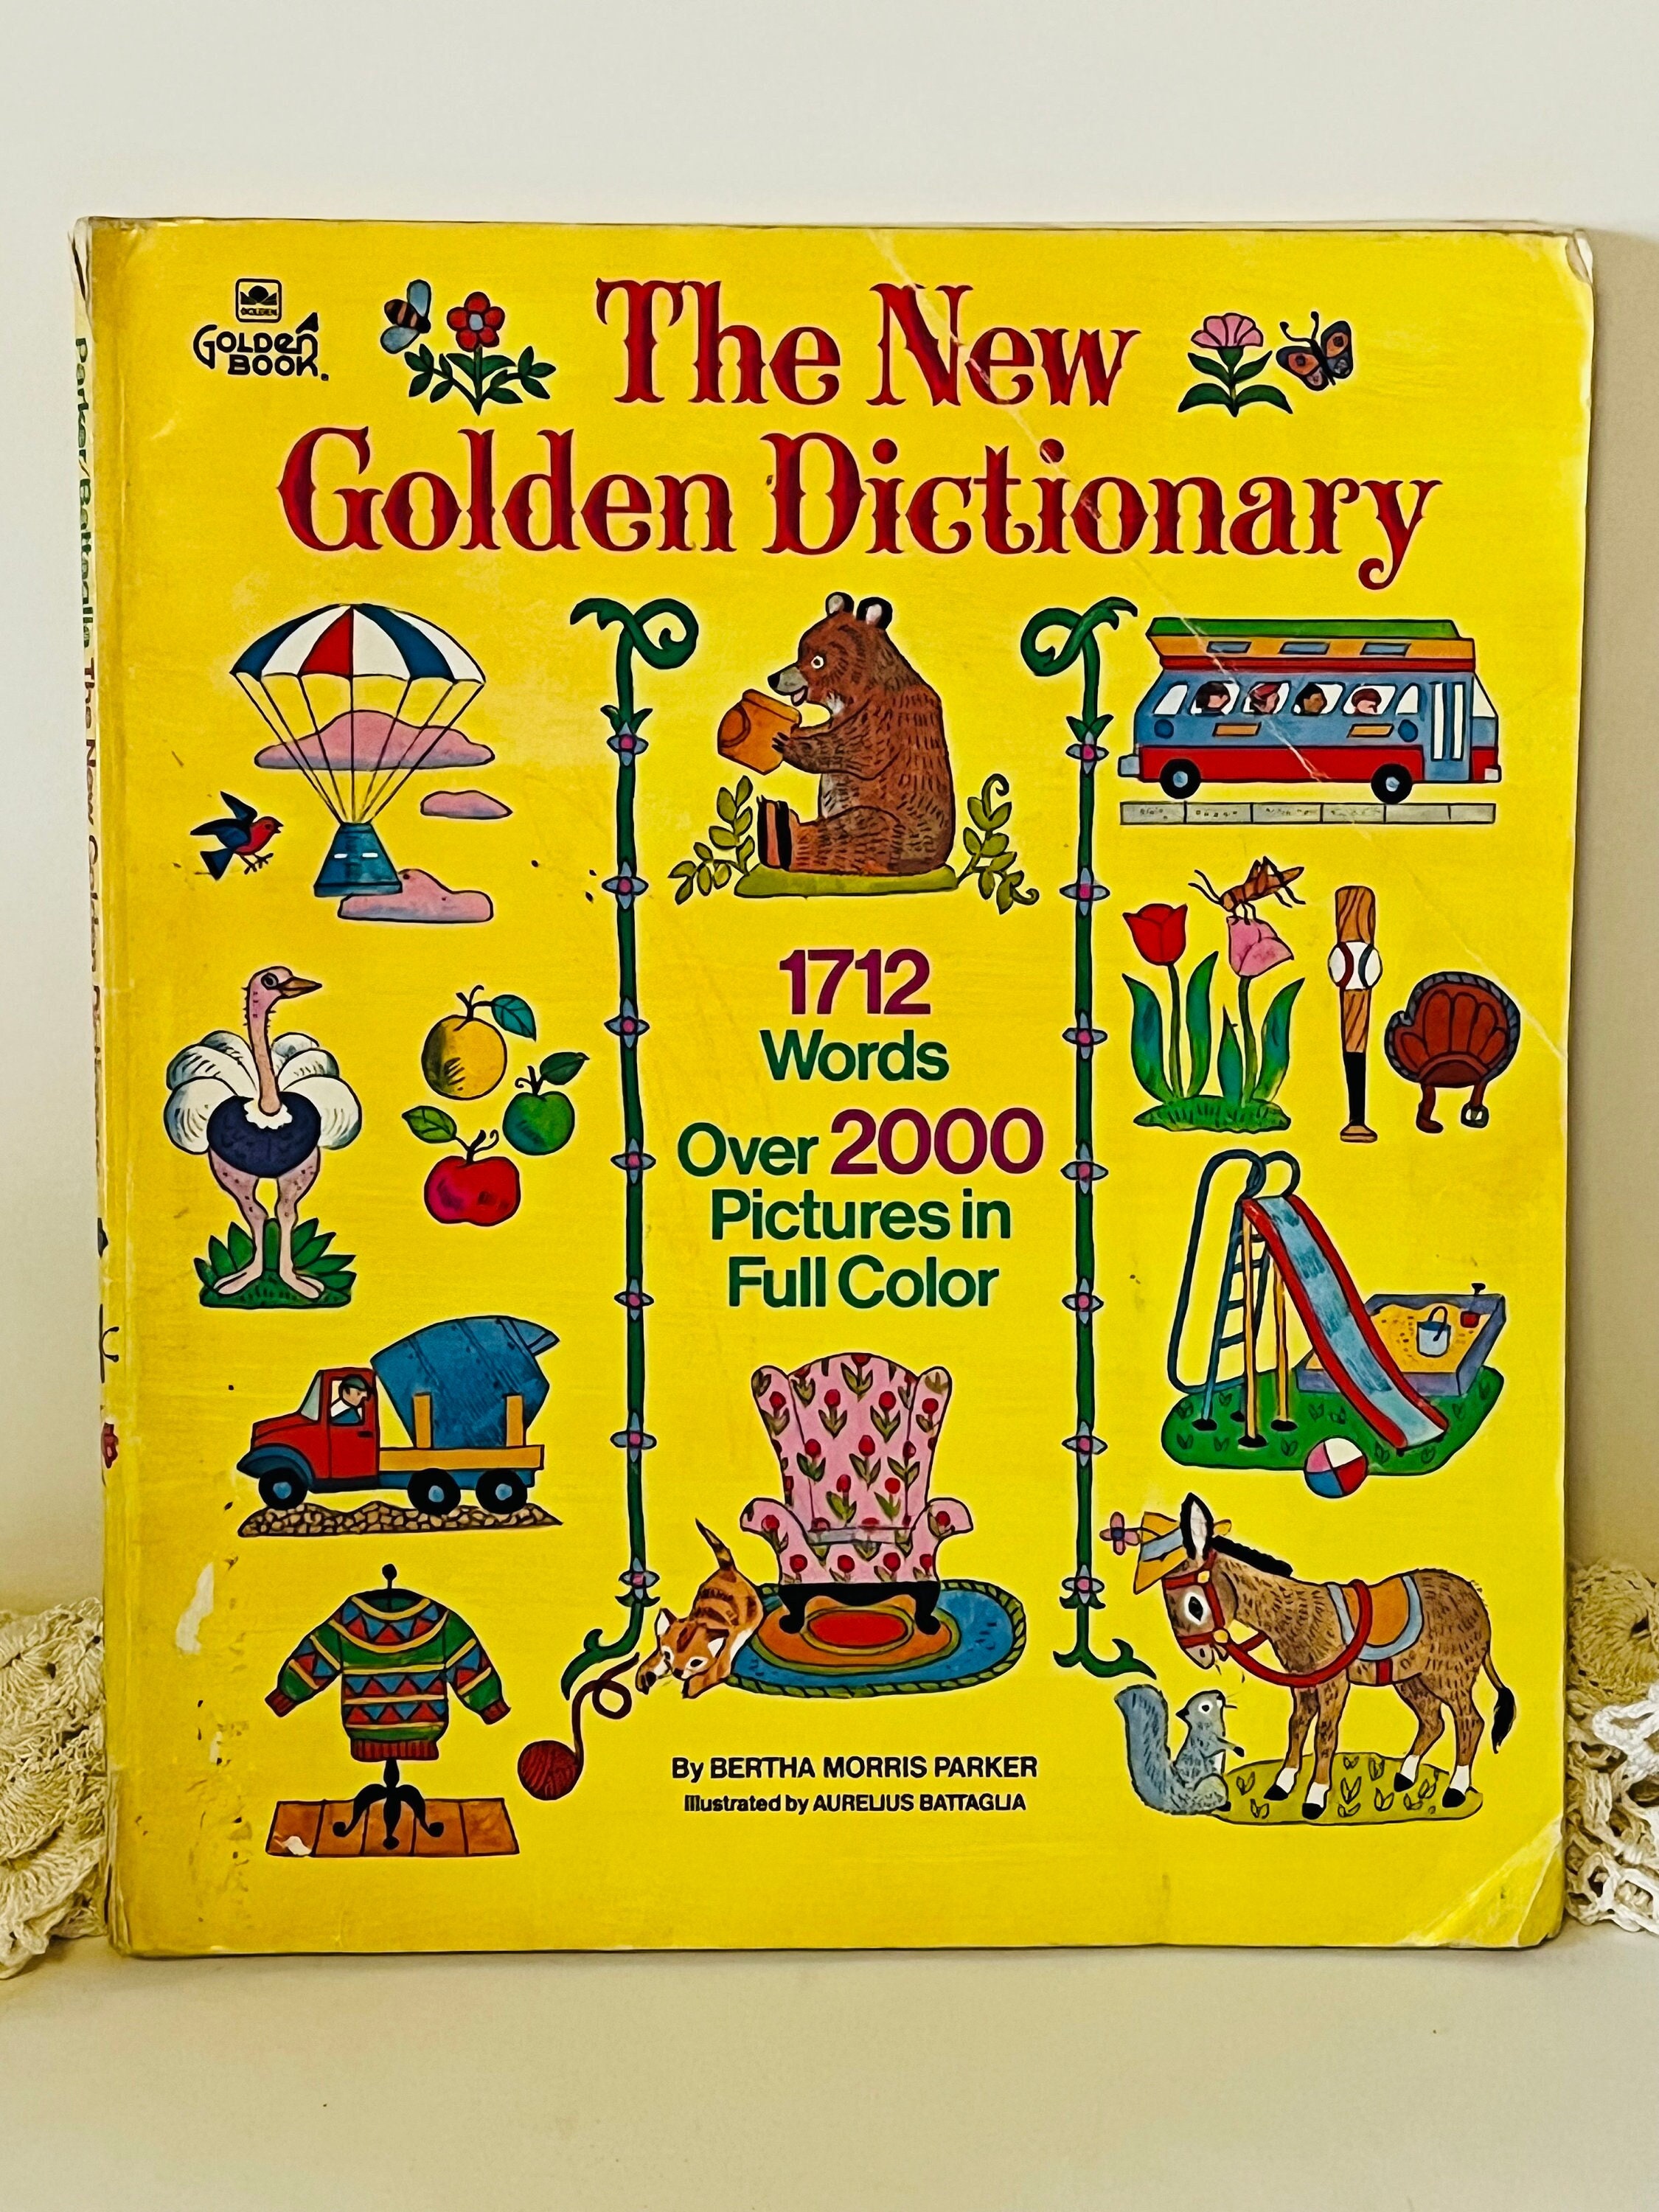 The New Golden Dictionary Paperback by Bertha Parker - Etsy